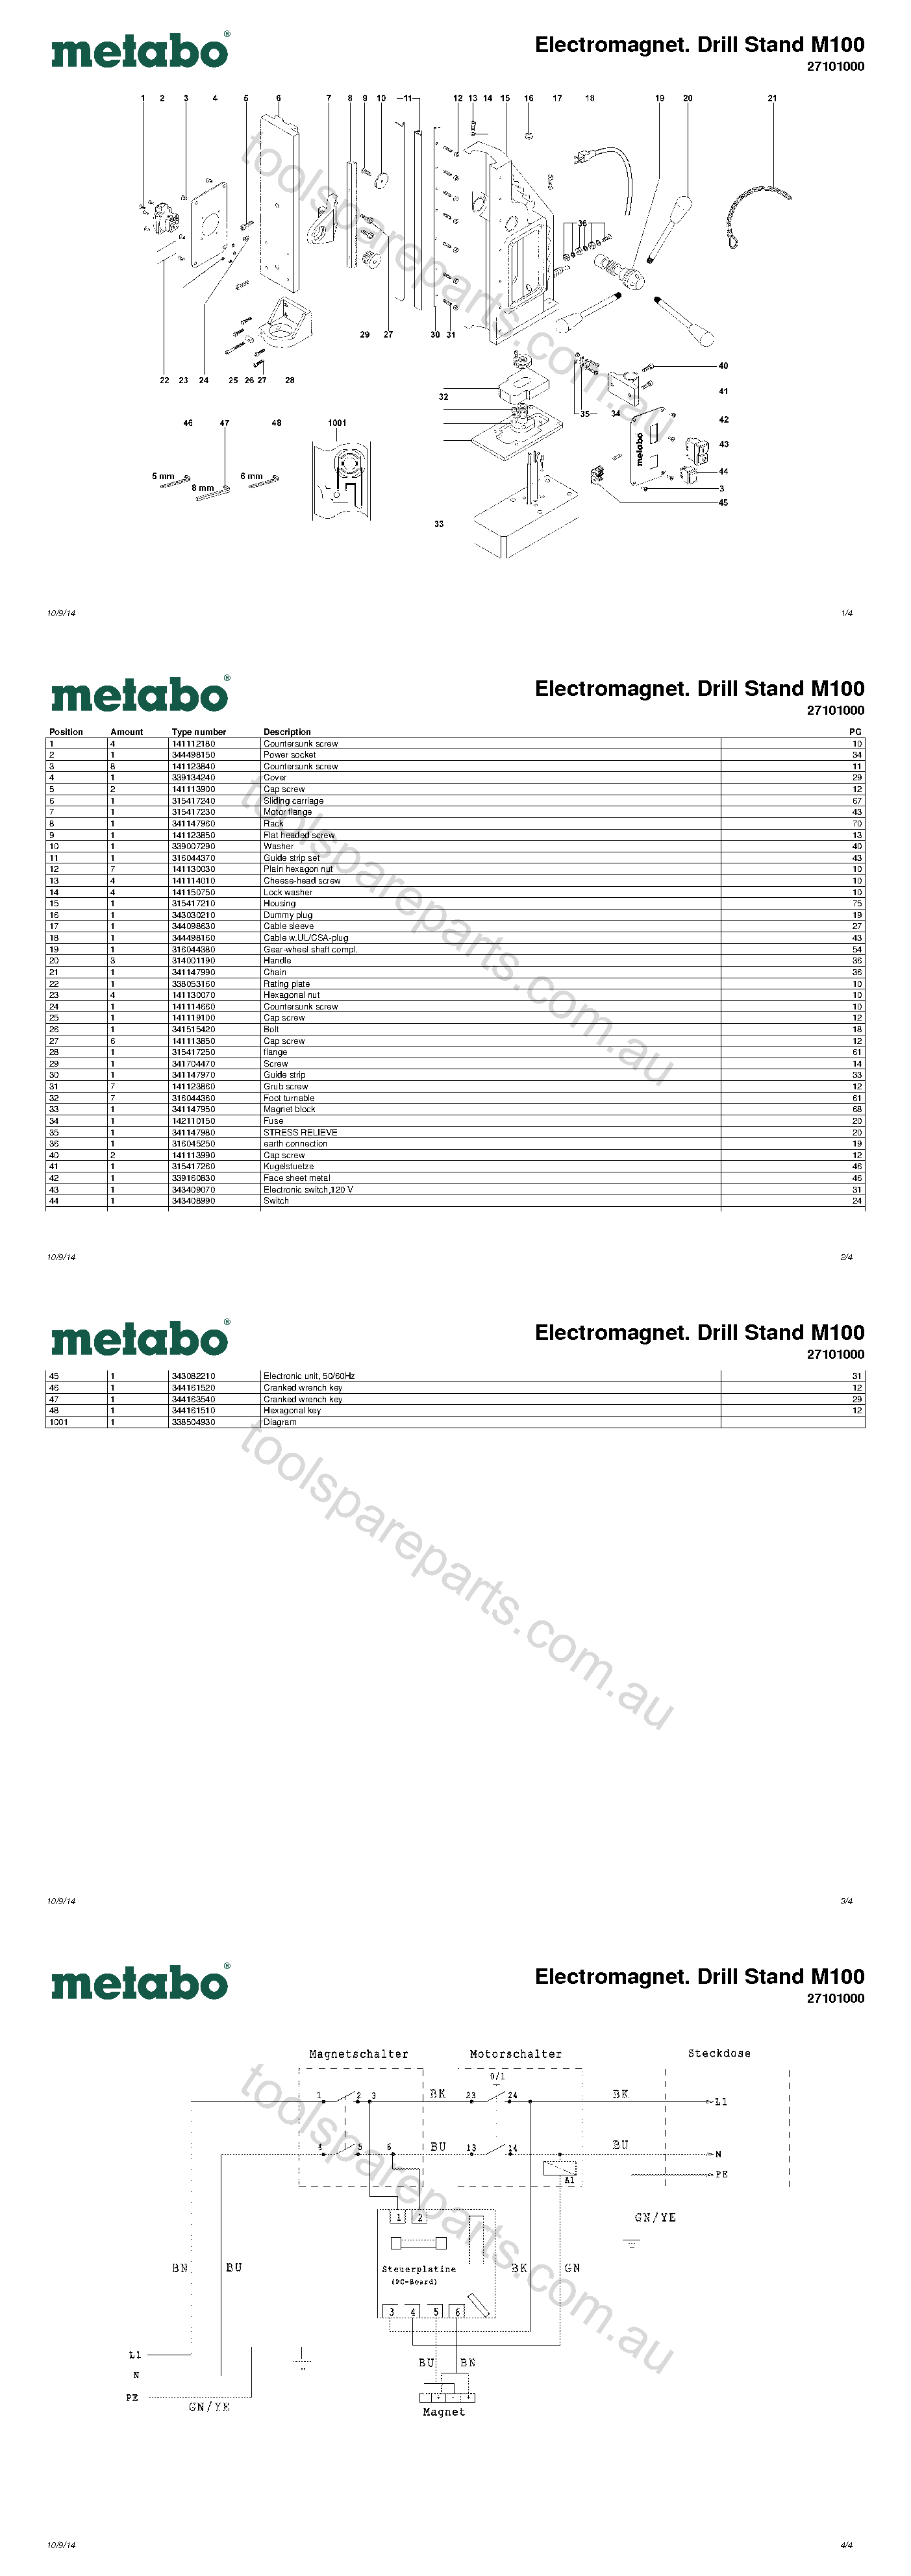 Metabo Electromagnet. Drill Stand M100 27101000  Diagram 1